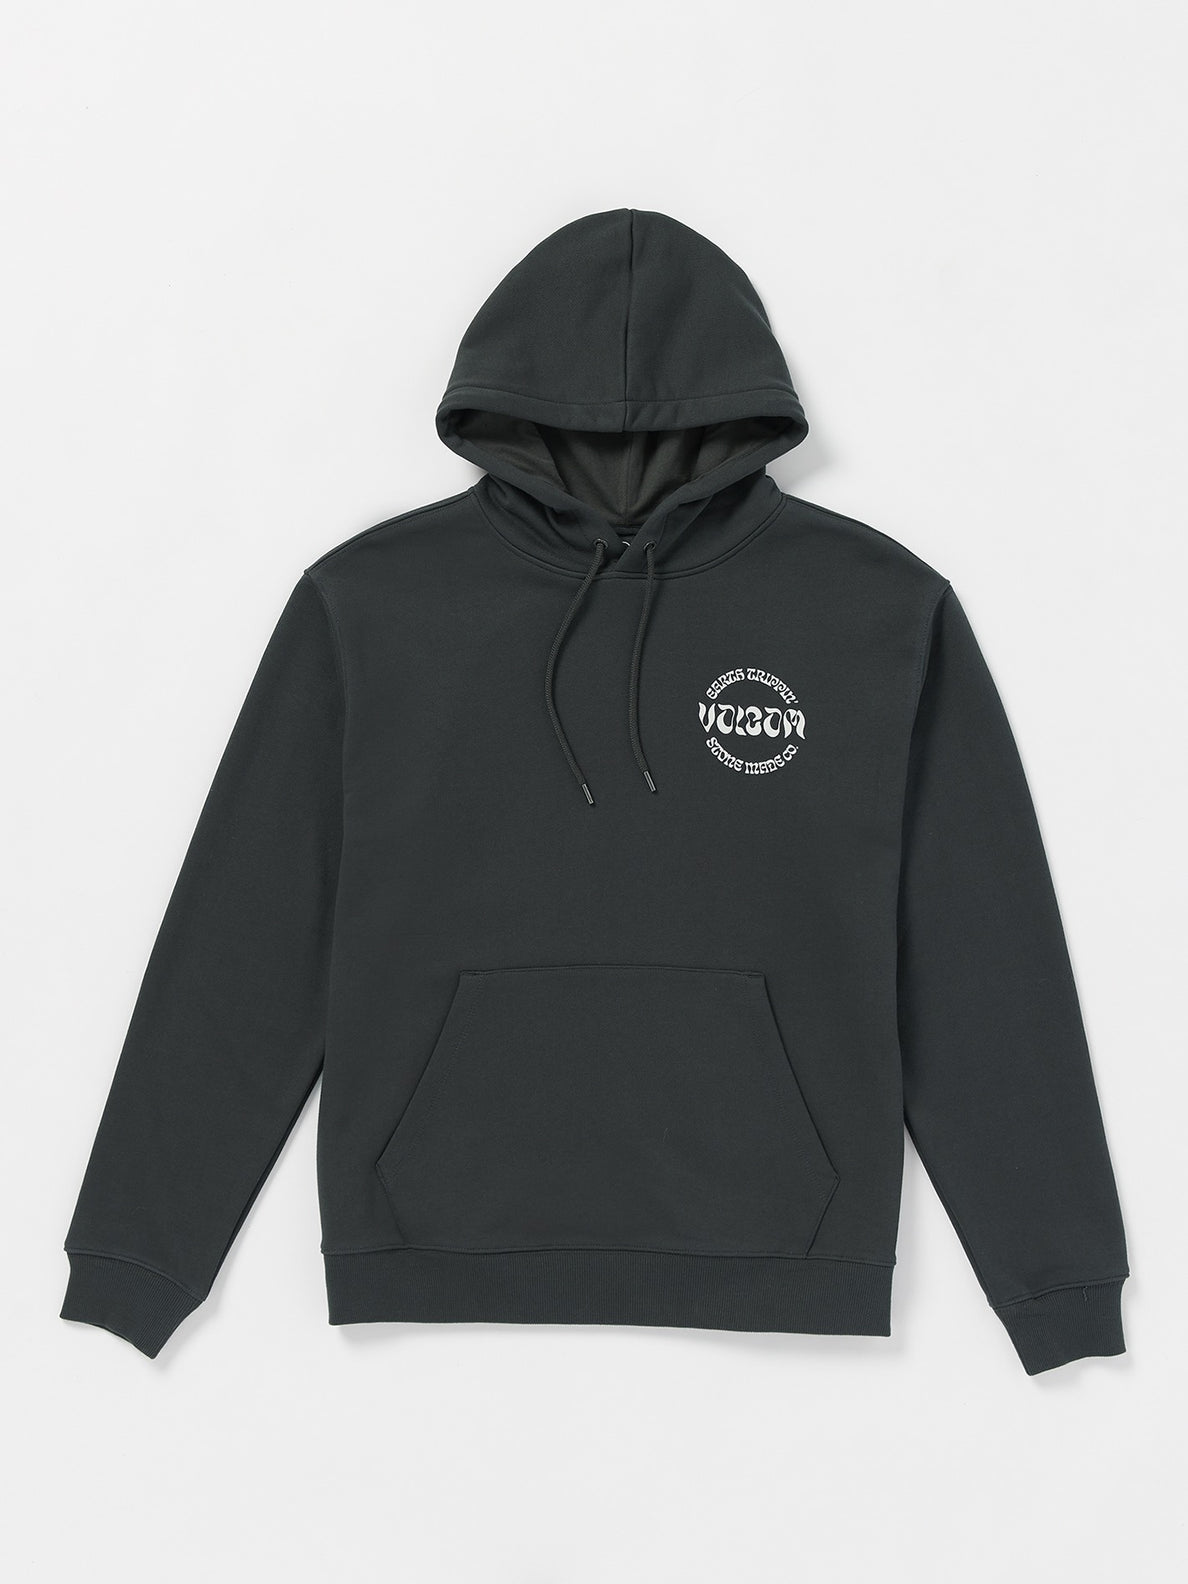 Terry Stoned Pullover - Stealth